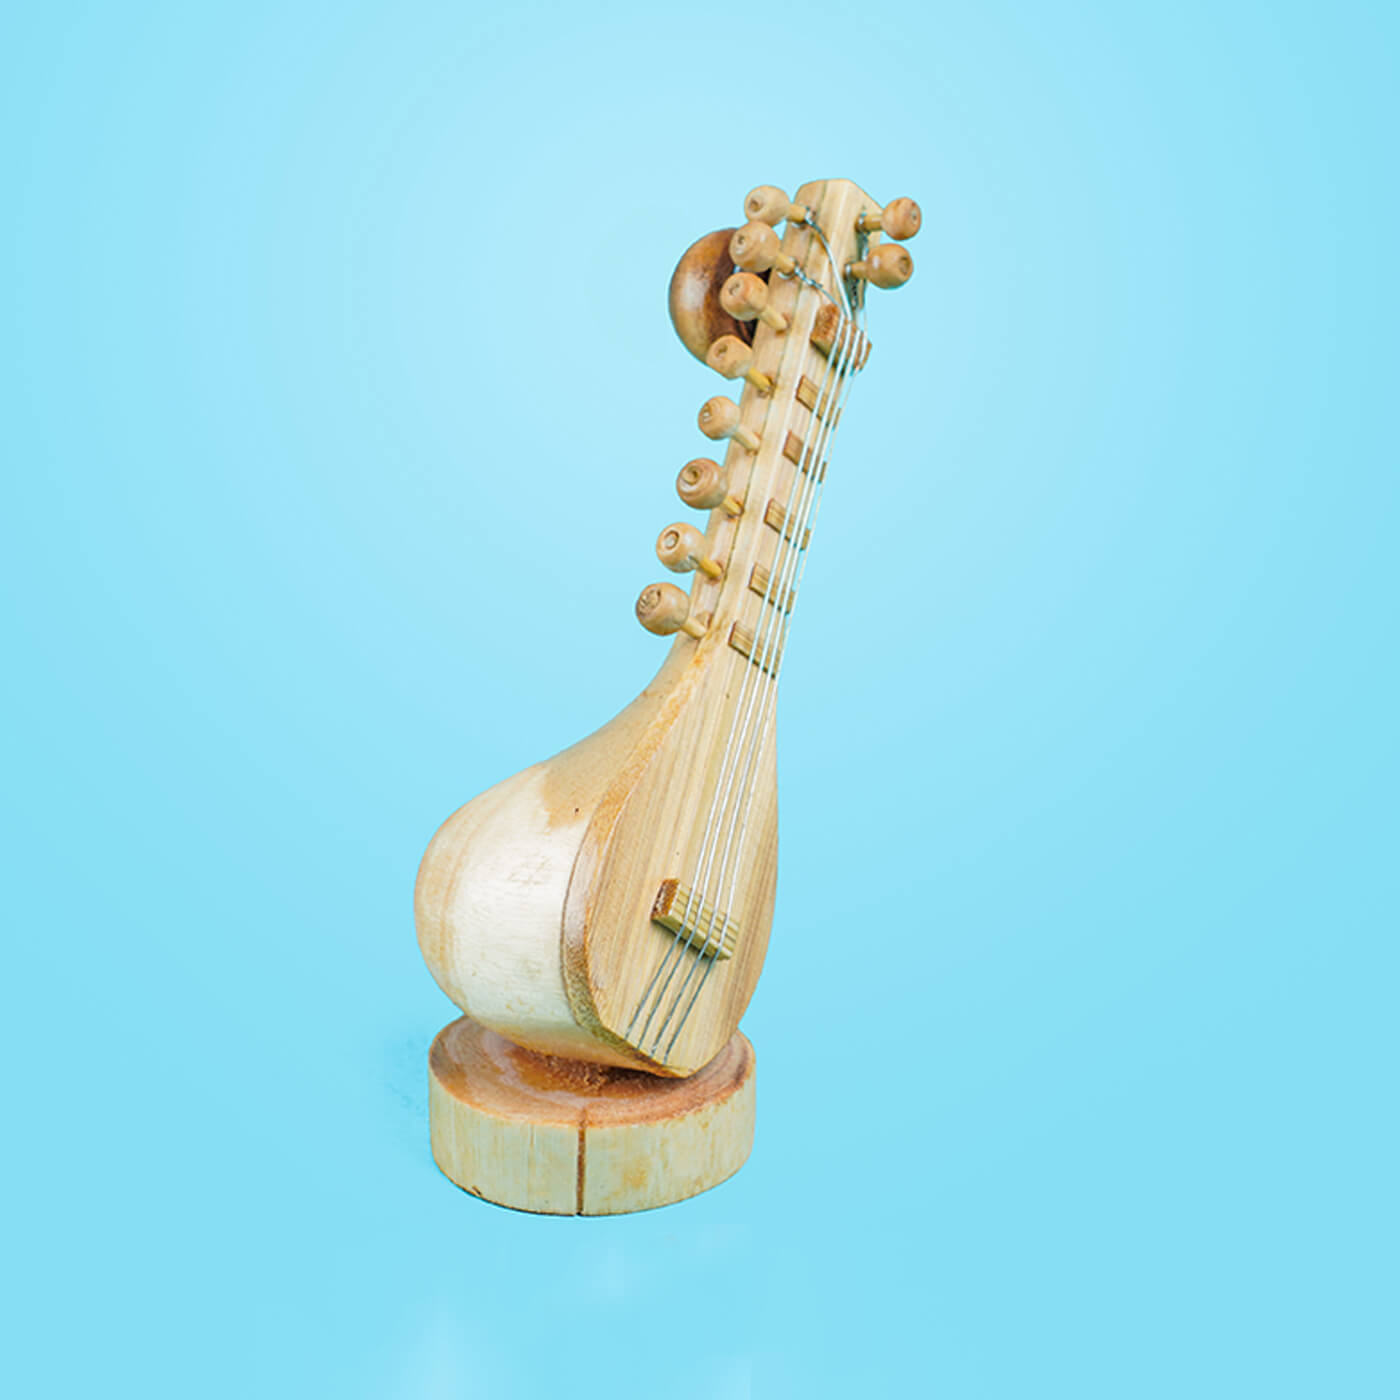 Discover the Joy of Music with a Variety of Instruments